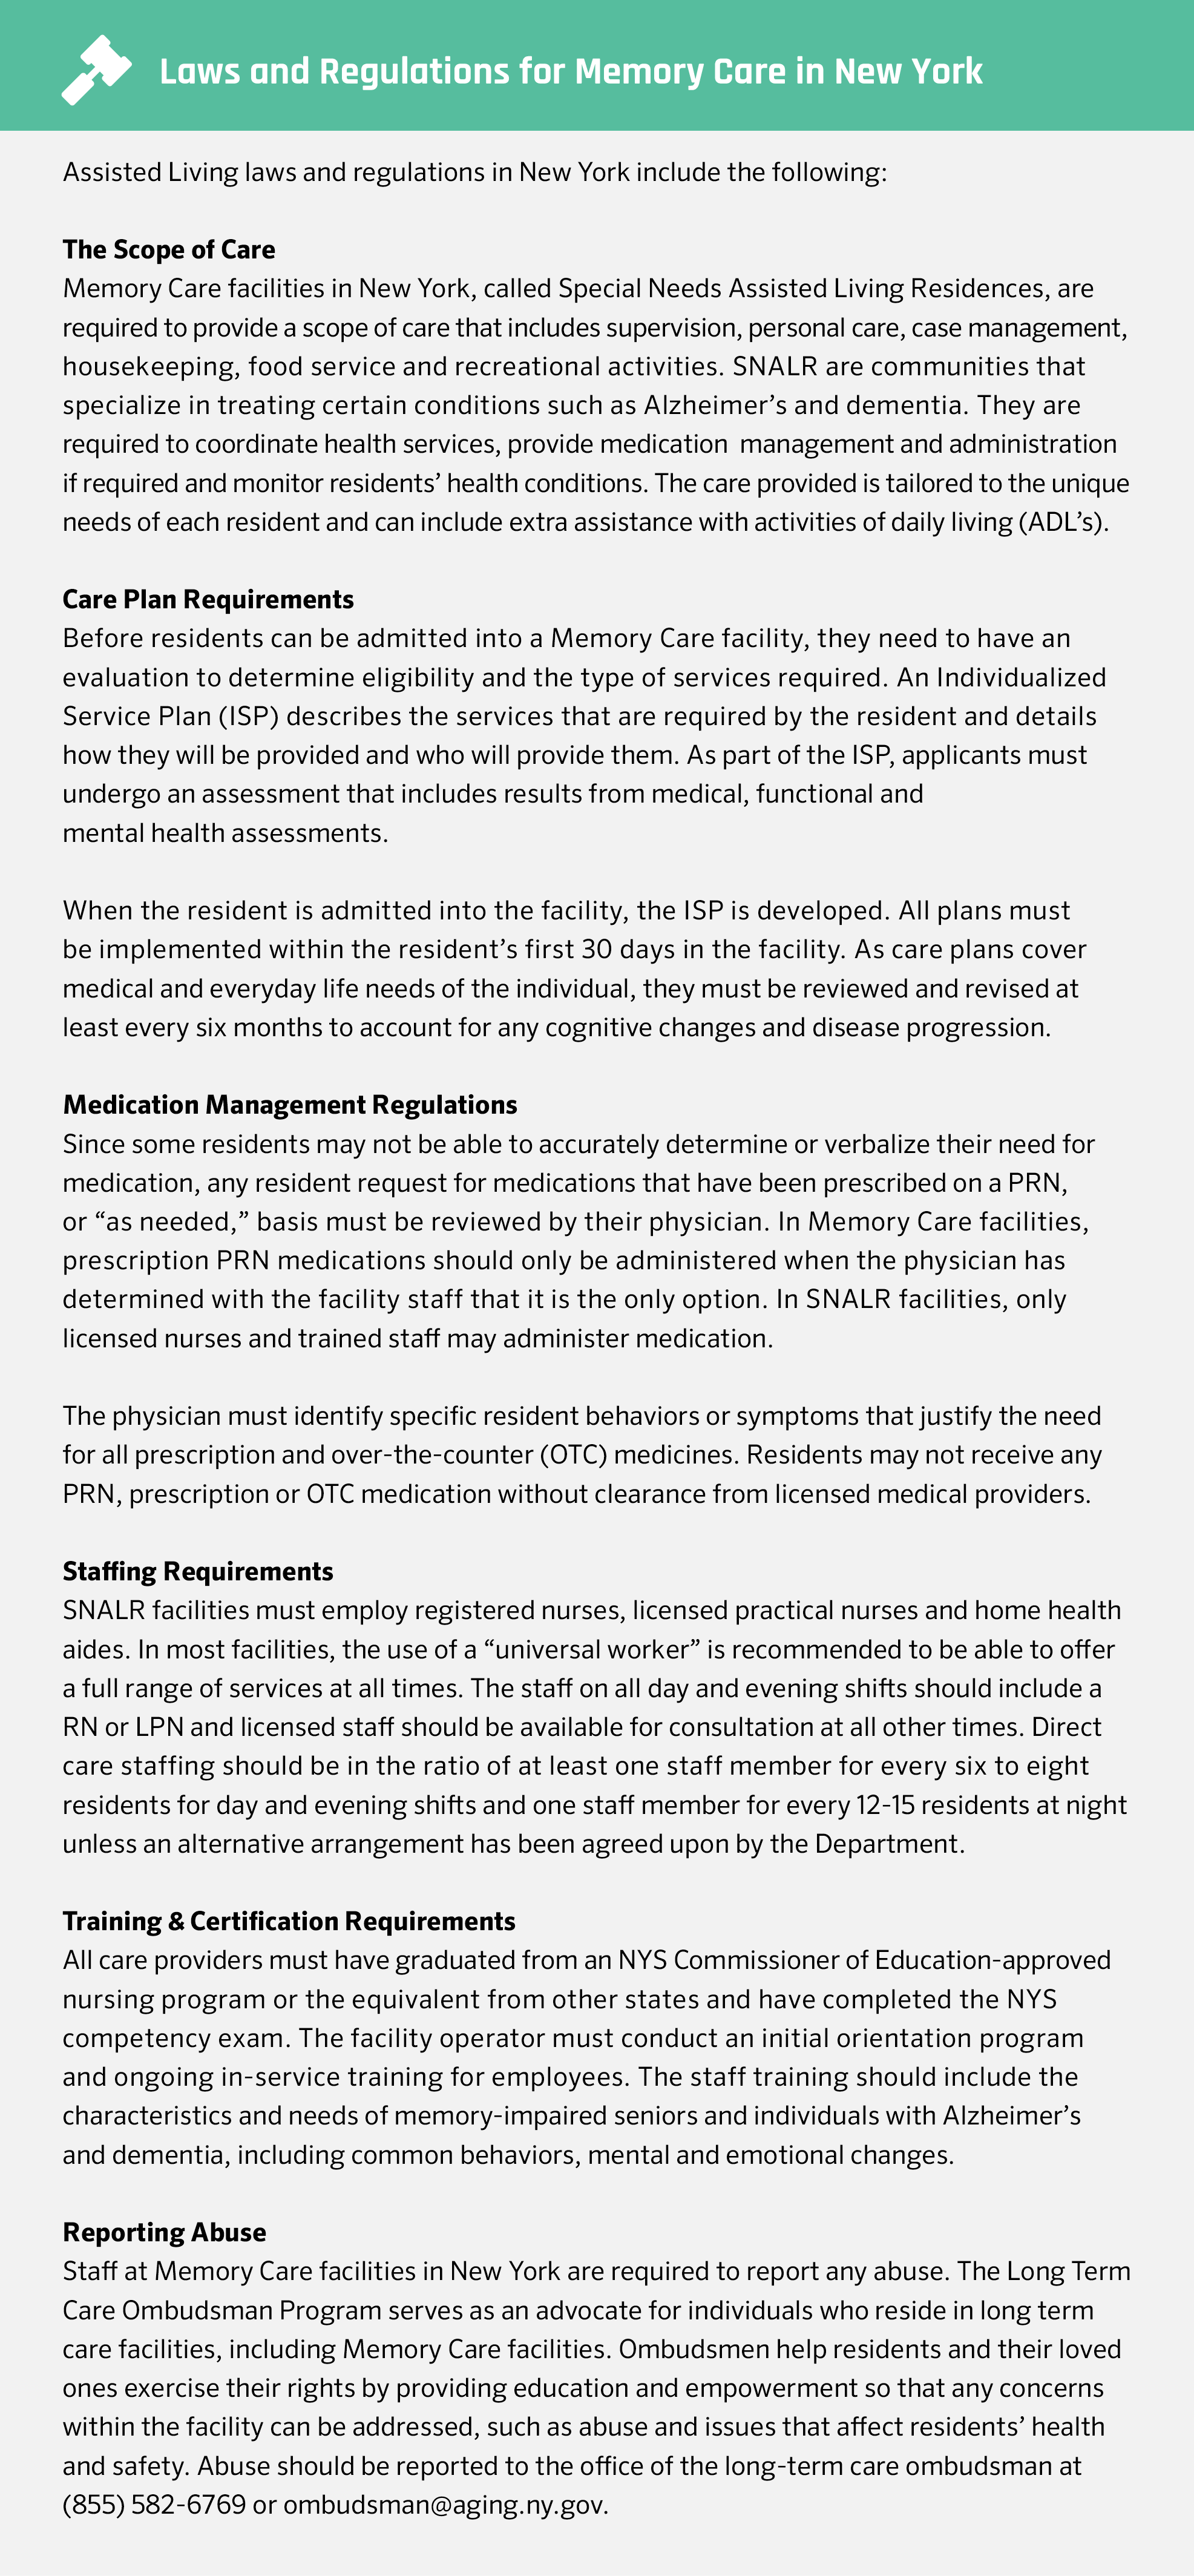 Memory care laws and regulations in New York